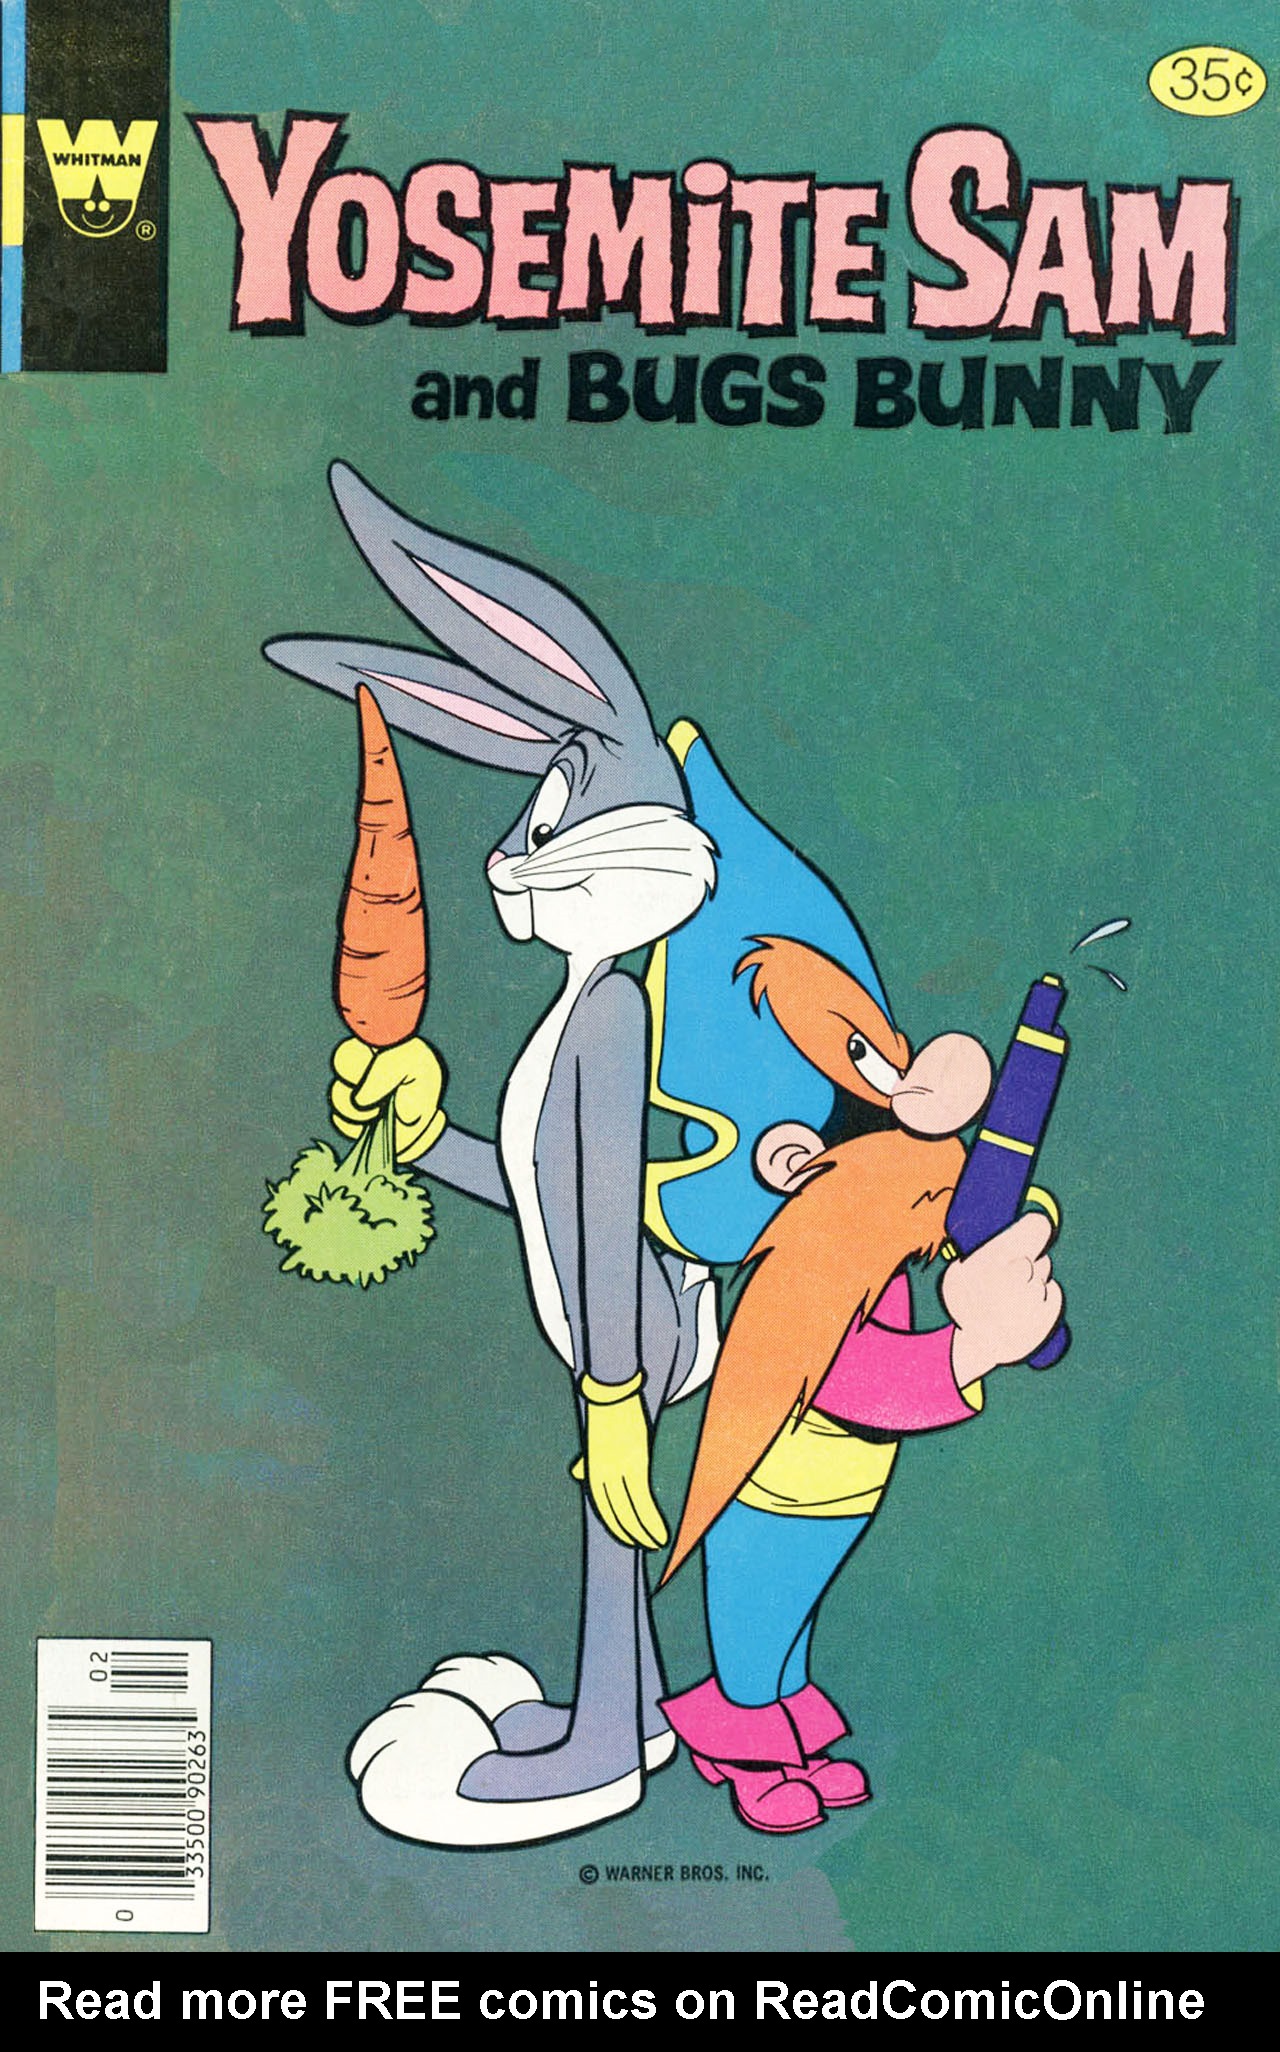 Read online Yosemite Sam and Bugs Bunny comic -  Issue #58 - 1